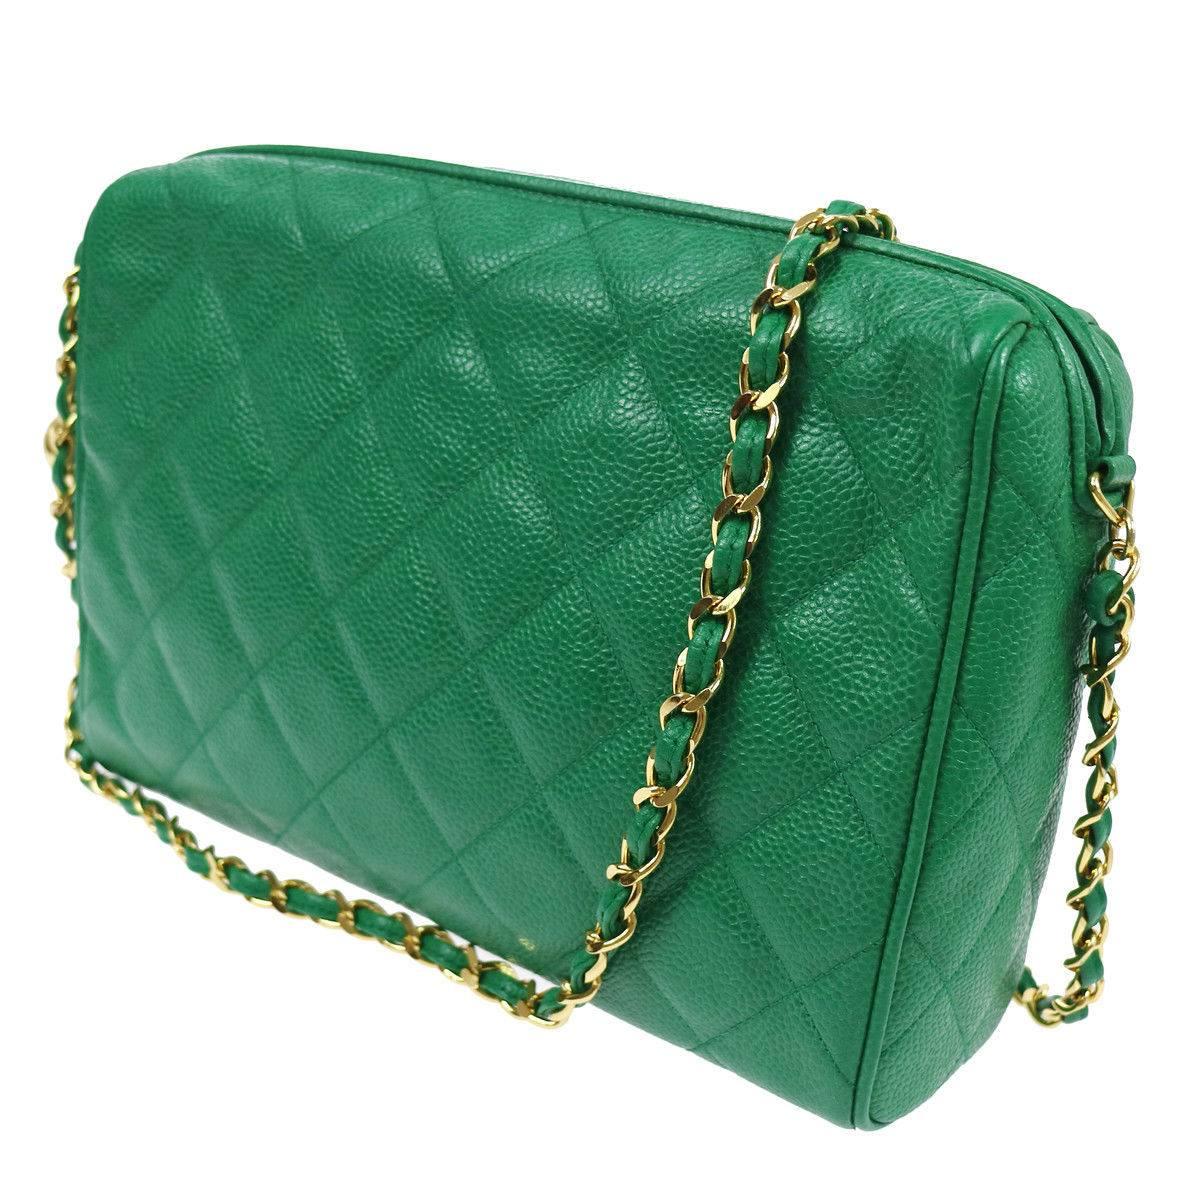 - Vintage 90s Chanel green quilted caviar leather shoulder bag. 

- Featuring a gold-toned 